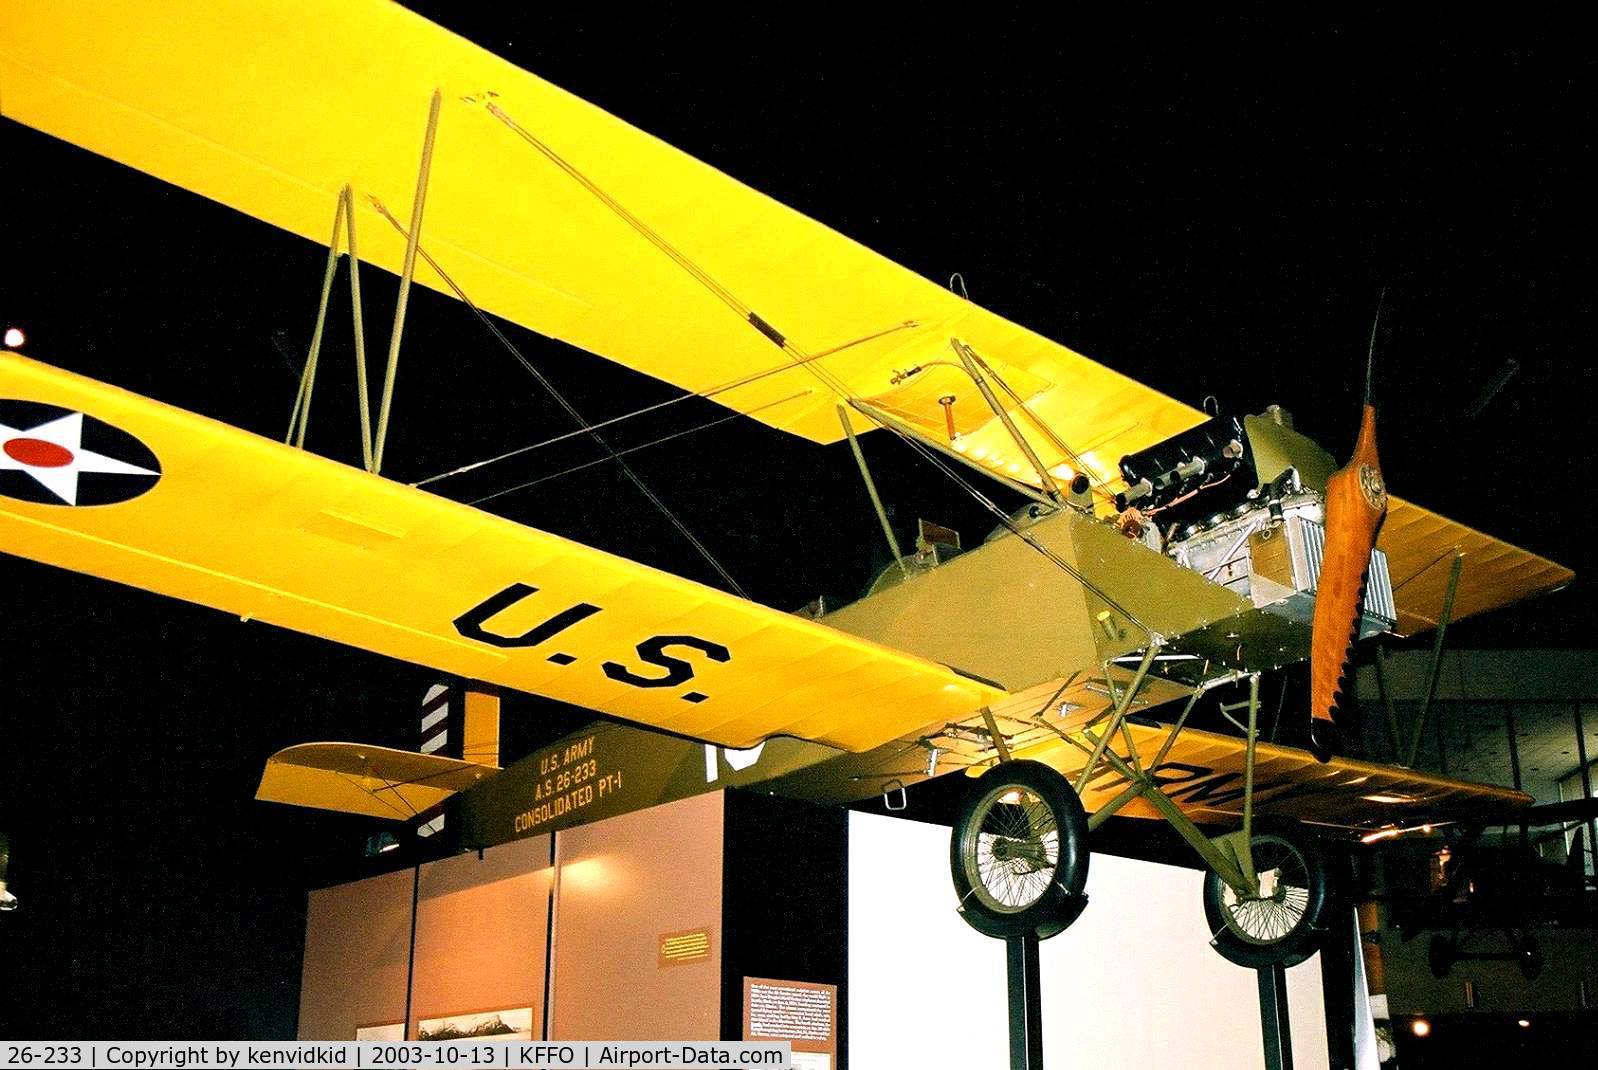 26-233, 1926 Consolidated PT-1 Trusty C/N Not found 26-0233, At The Museum of the United States Air Force Dayton Ohio.